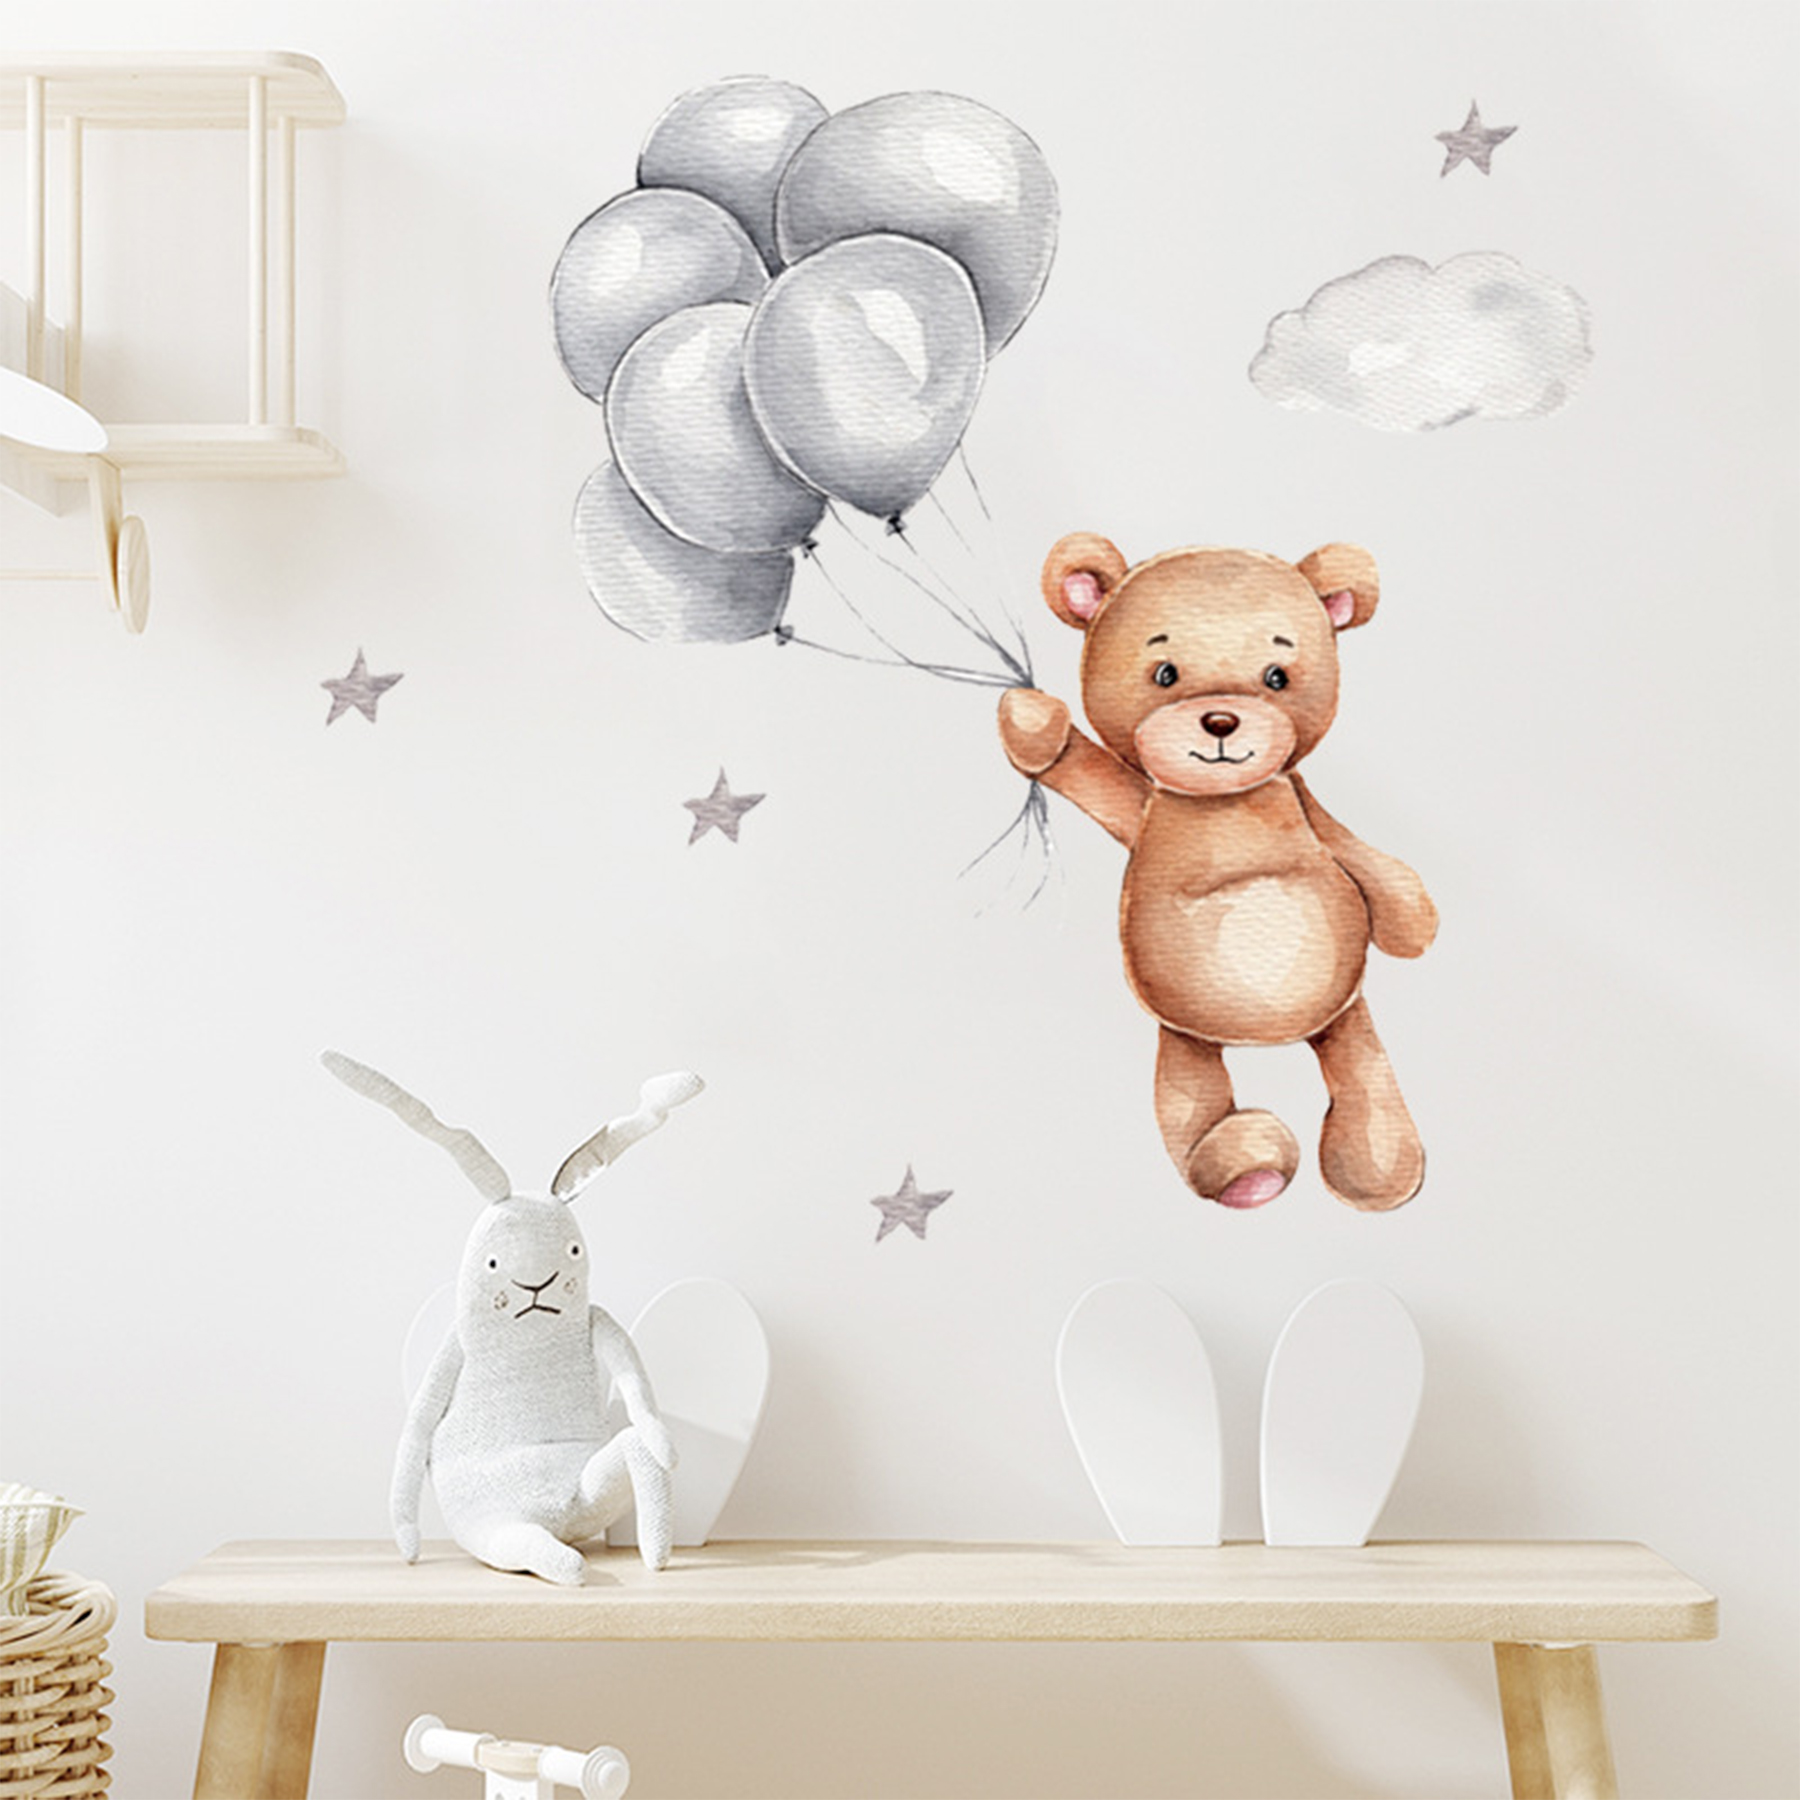 Sipo Wall sticker teddy bear with balloons